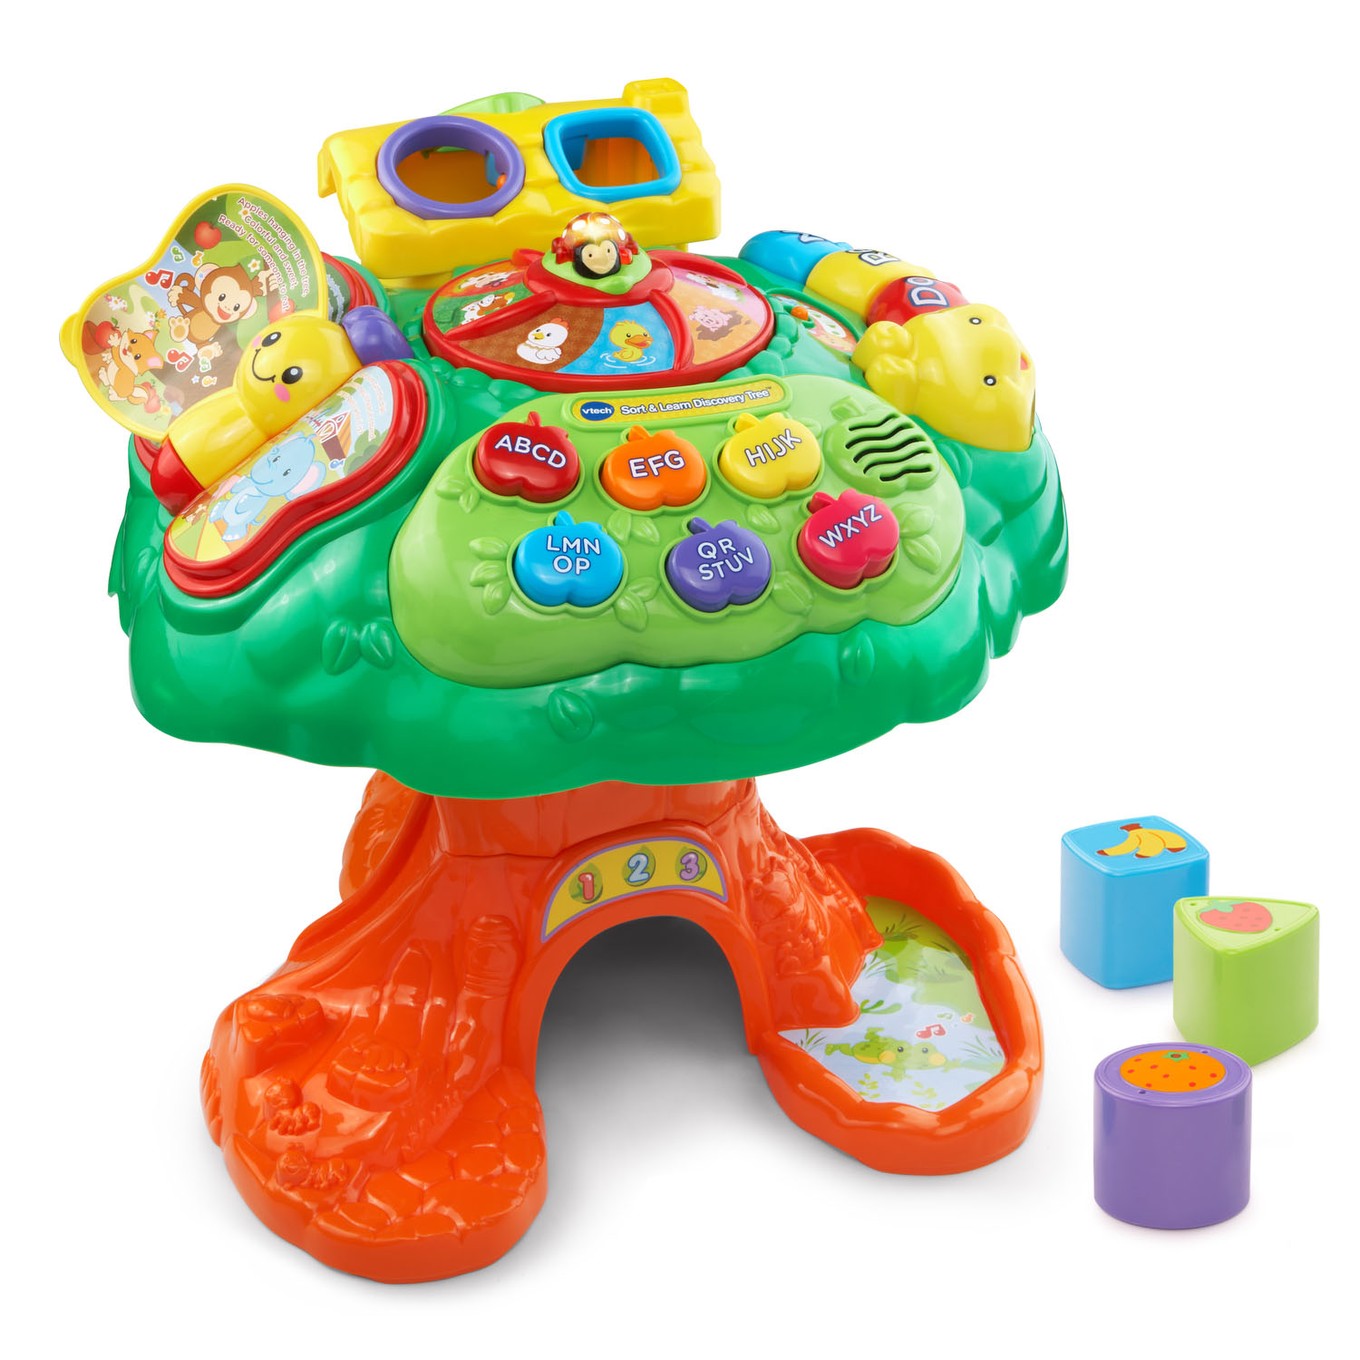 vtech activity table replacement phone